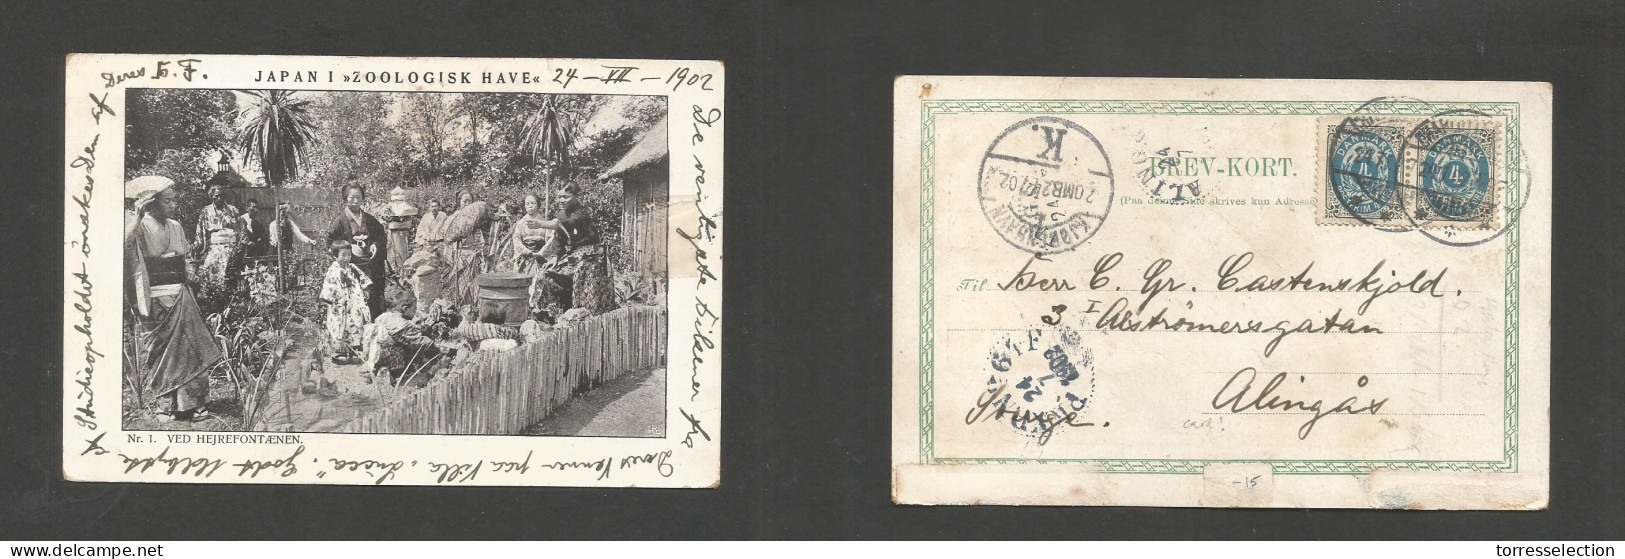 DENMARK. 1902 (24 July) Cph - Alingas, Sweden. Japan I Zoologisk Have Photo Ppc. Fkd Most Interesting Card. SALE. - Other & Unclassified